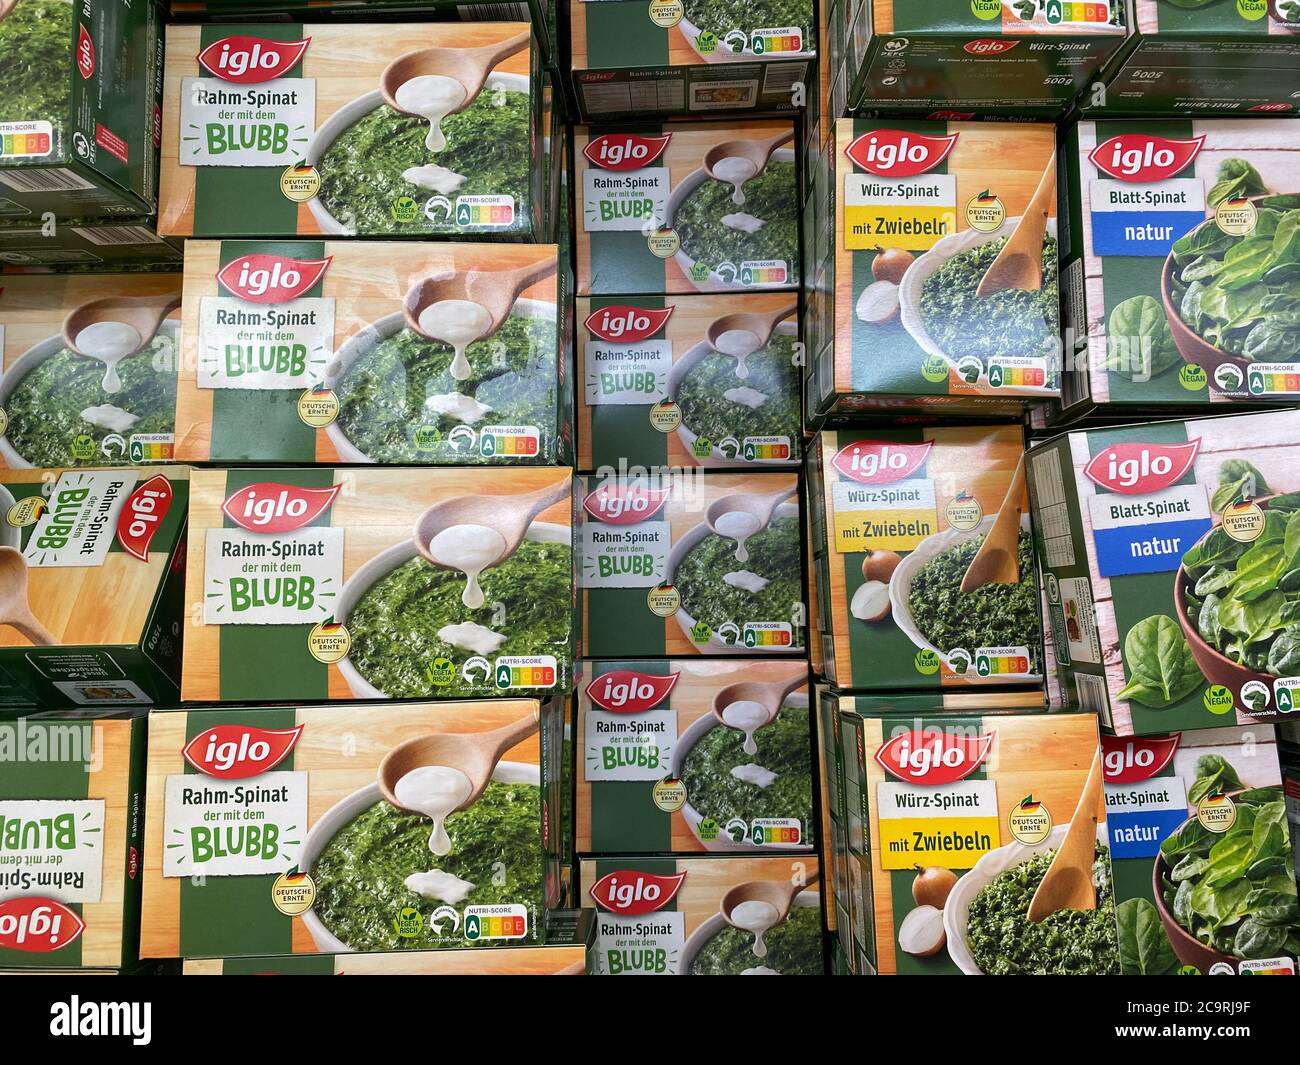 in Alamy of ready Closeup cooling frozen boxs Stock Viersen, - Germany 2020: spinach - Photo isolated 9. Iglo July counter